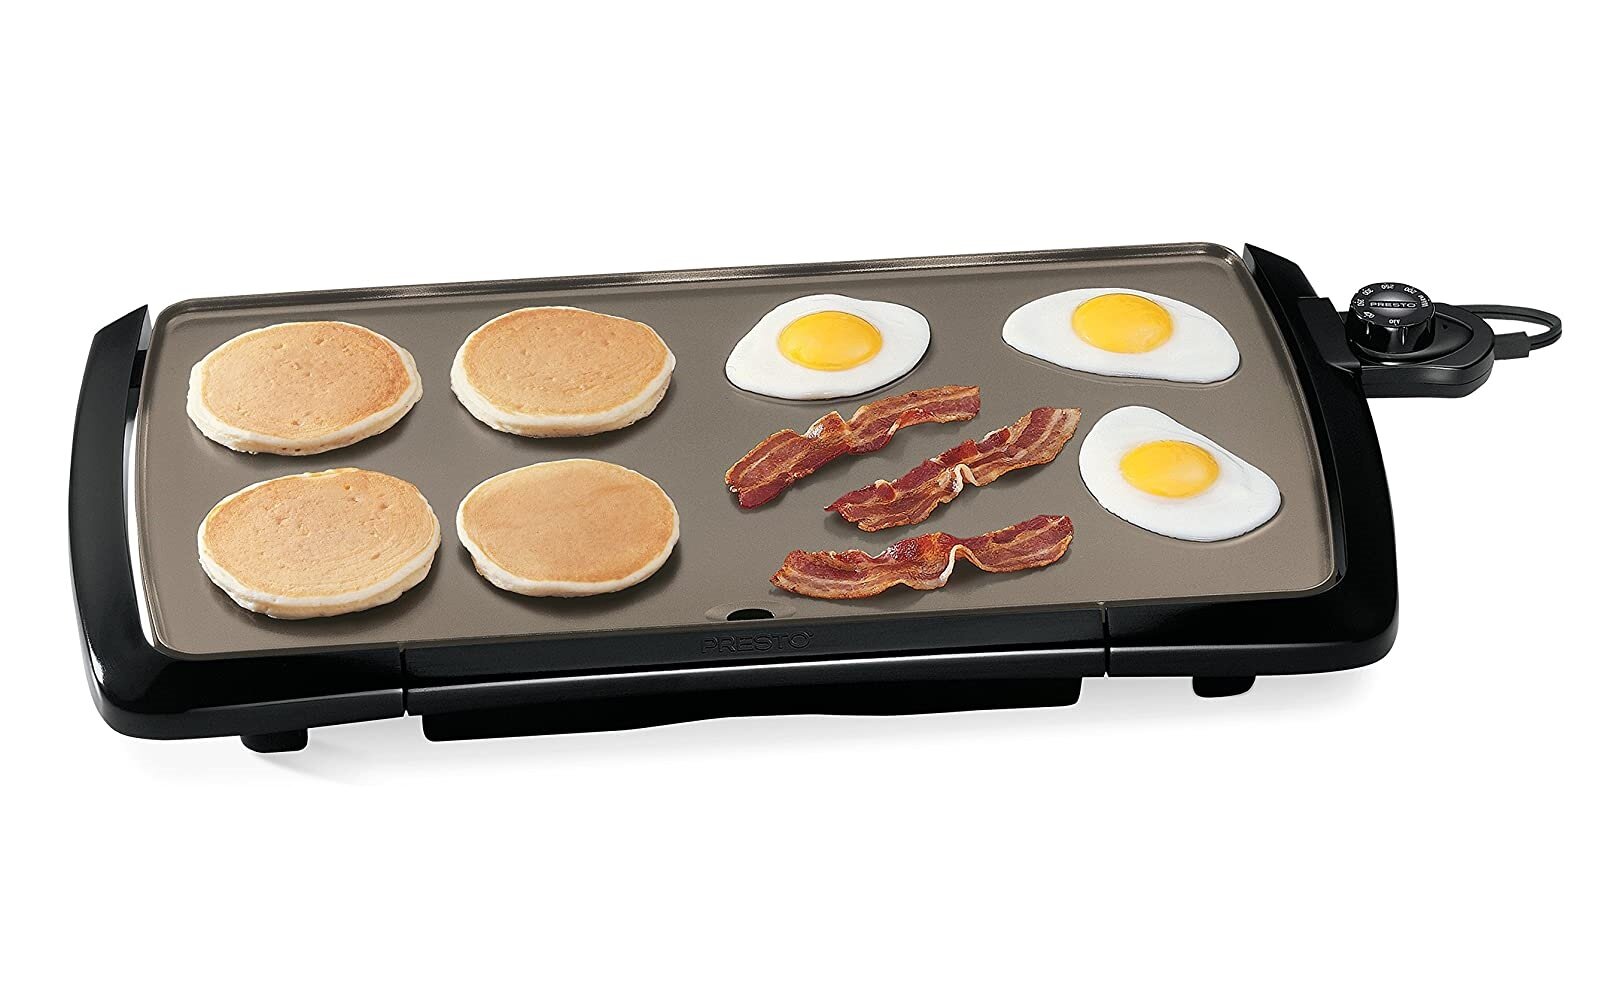 Presto Ceramic 22-inch 07062 Electric Griddle with removable handles,  Black, One Size